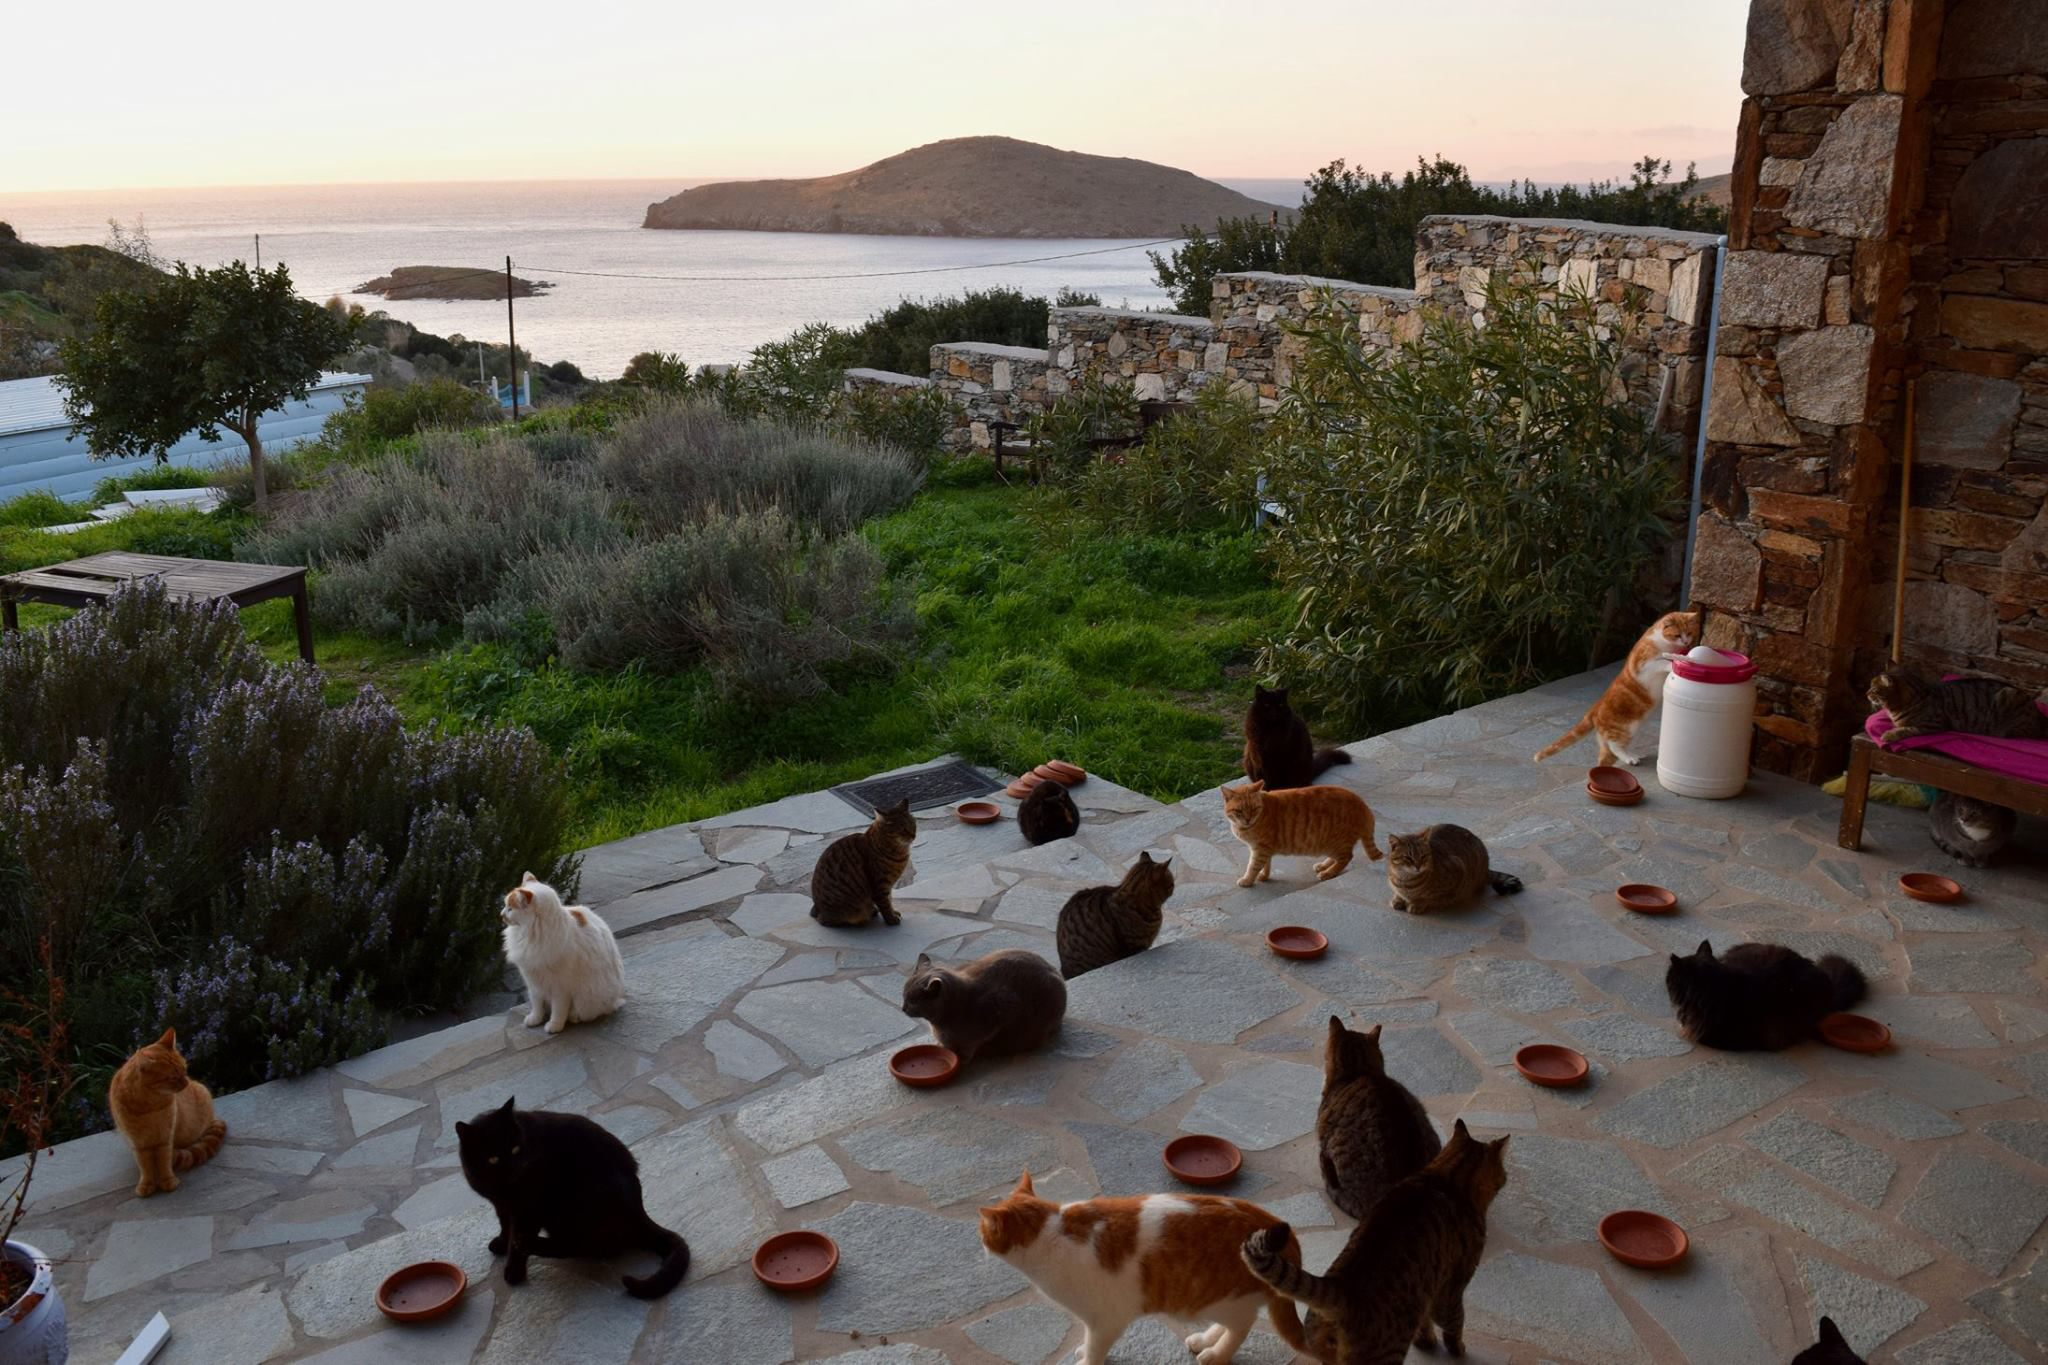 PHOTO: A cat sanctuary on the Greek island of Syros posted a job to live on the island in an all-expenses paid house and care for 55 cats.